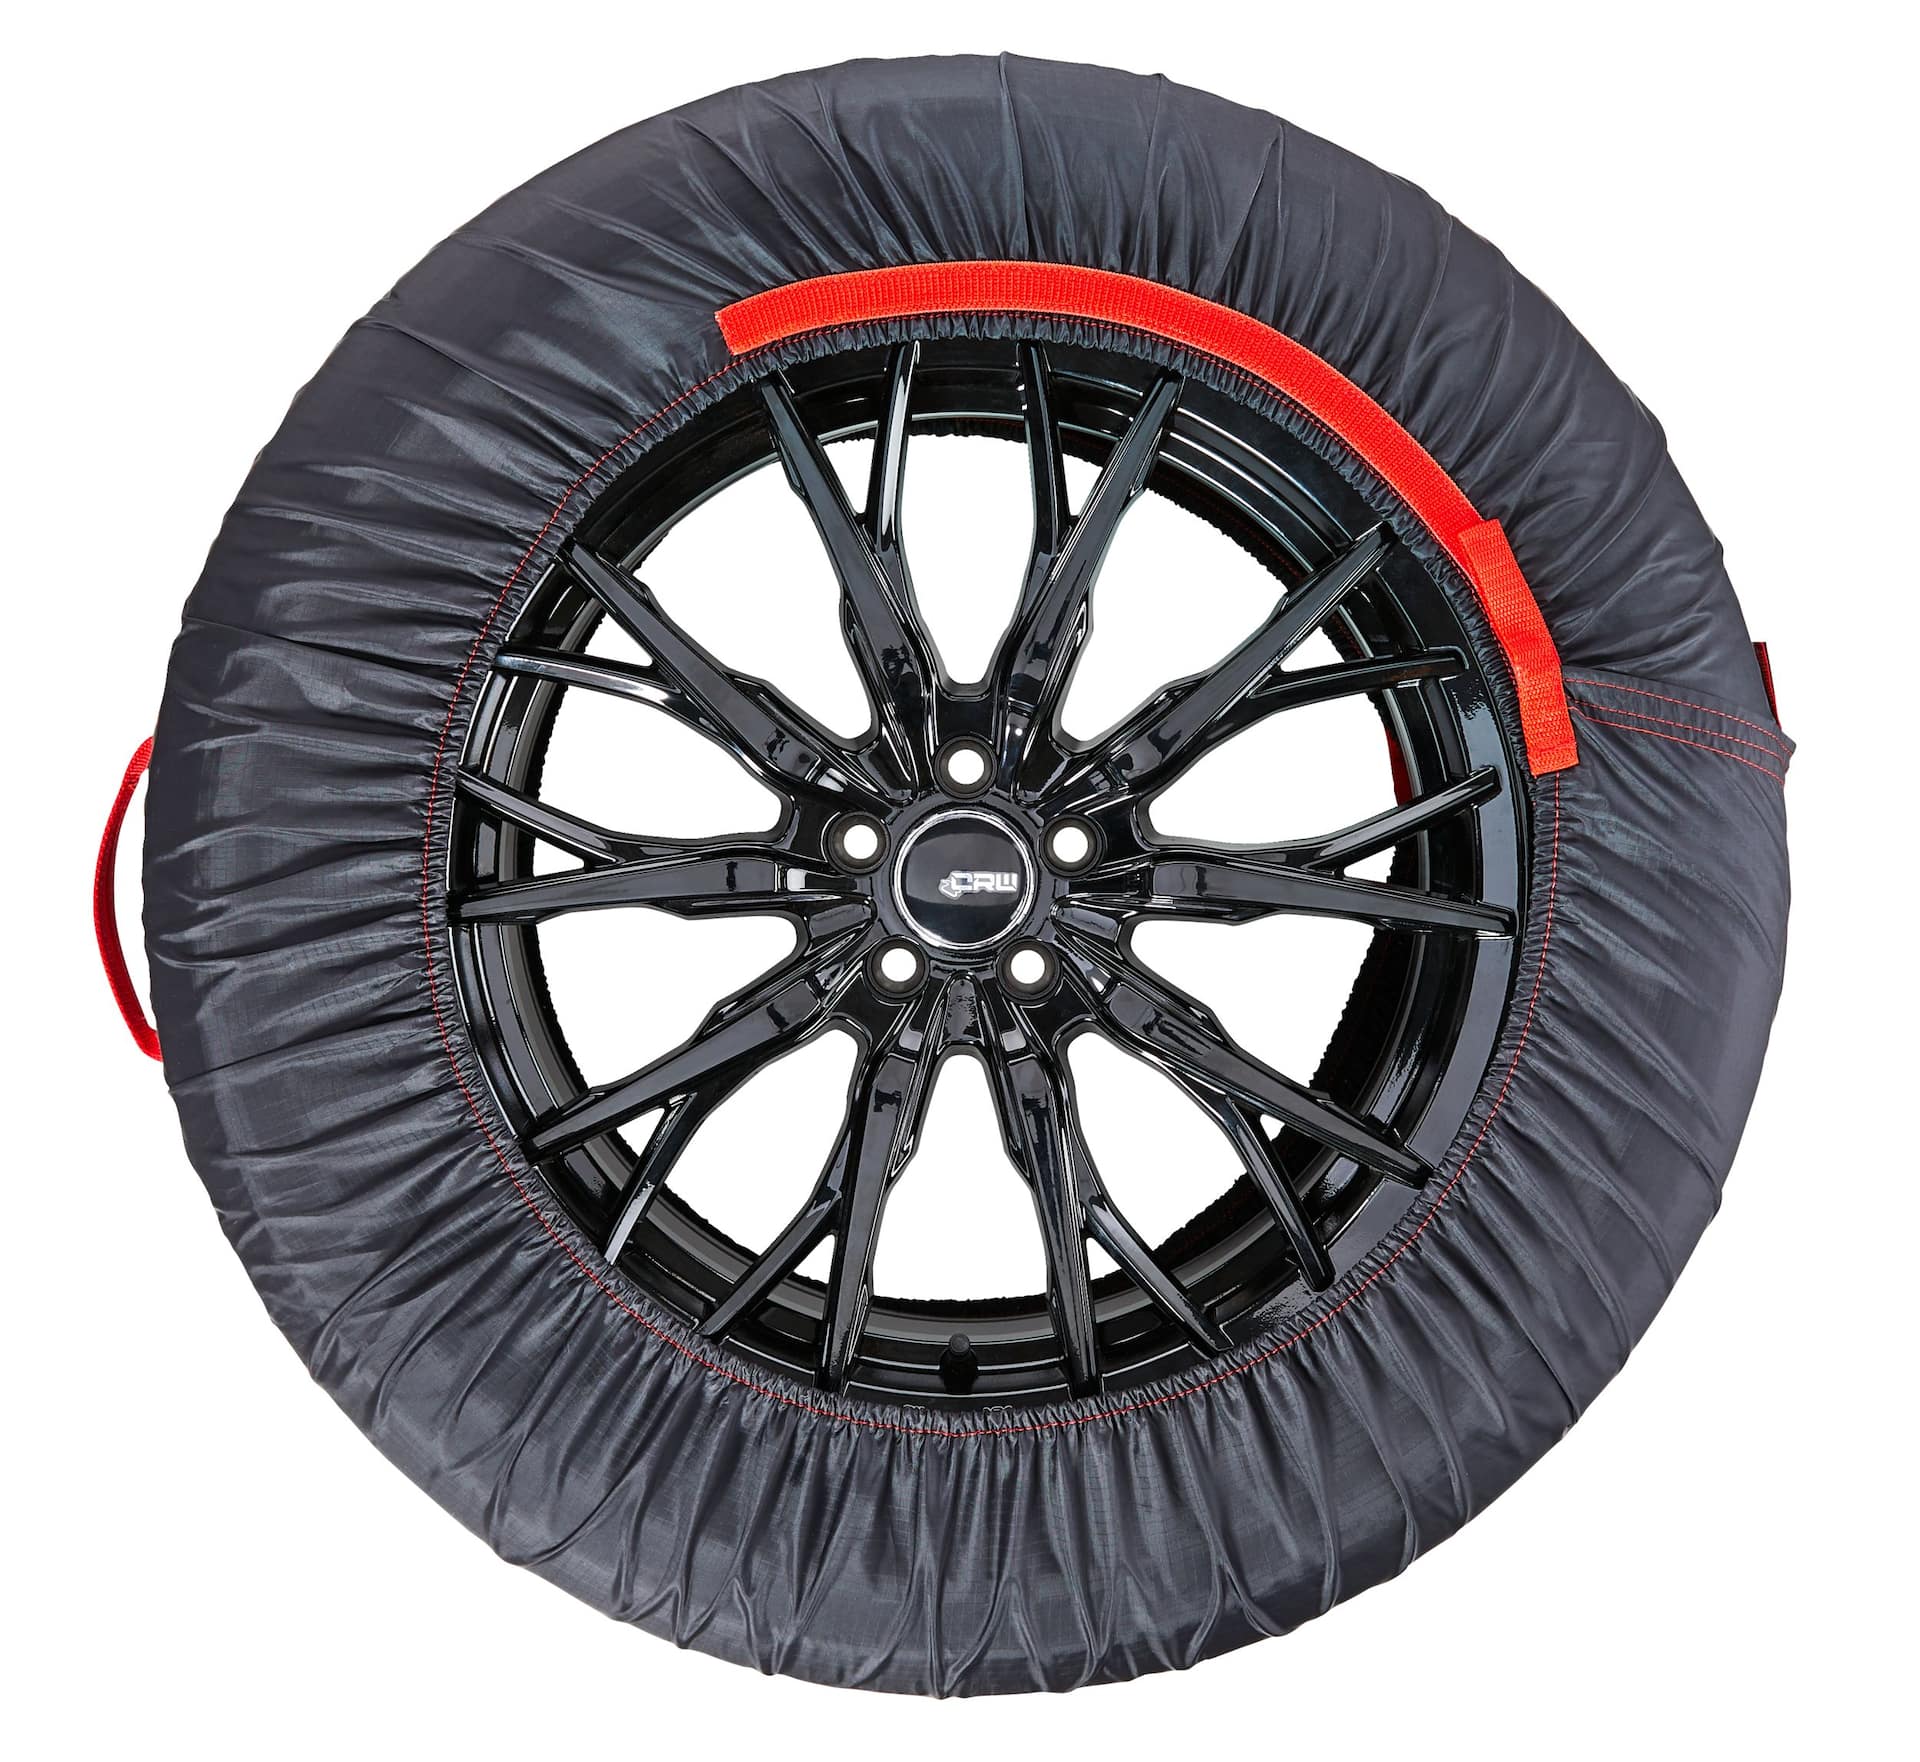 MotoMaster Universal Adjustable Tire Cover, 4-pk | Canadian Tire